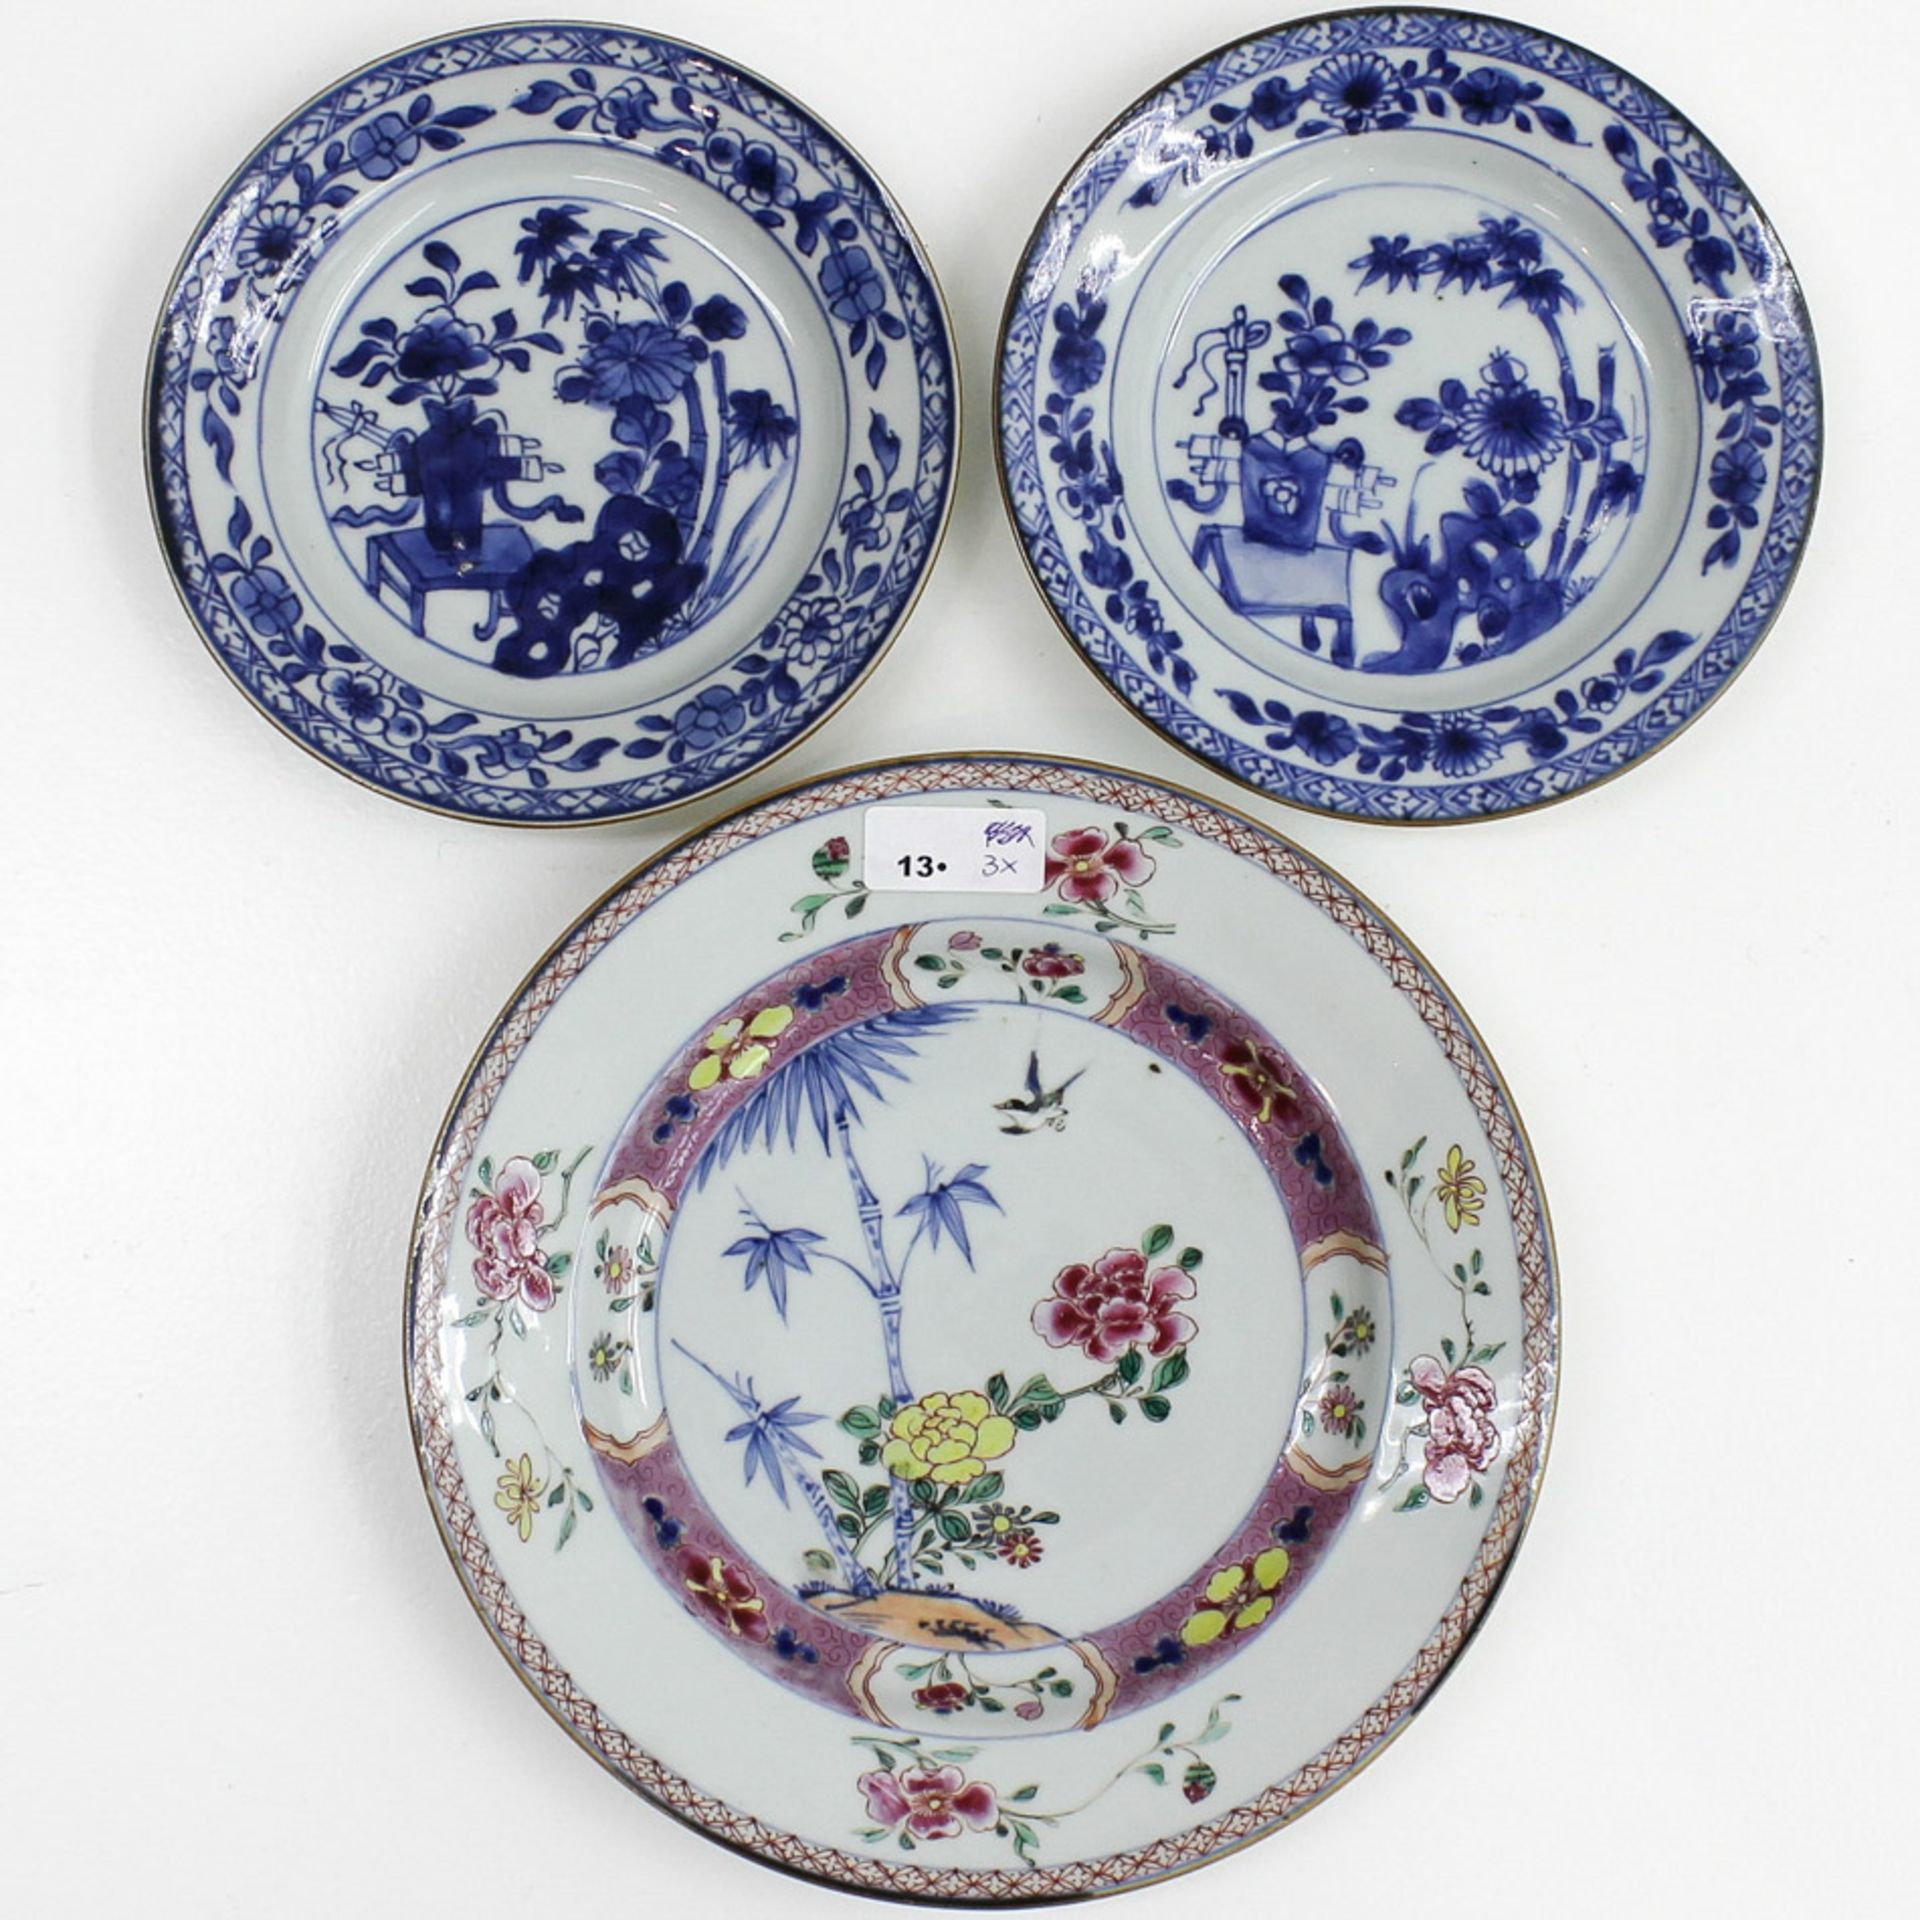 Lot of 3 China Porcelain Plates Including 1 Family Rose and 2 Blue and white decor, 1 small hairline